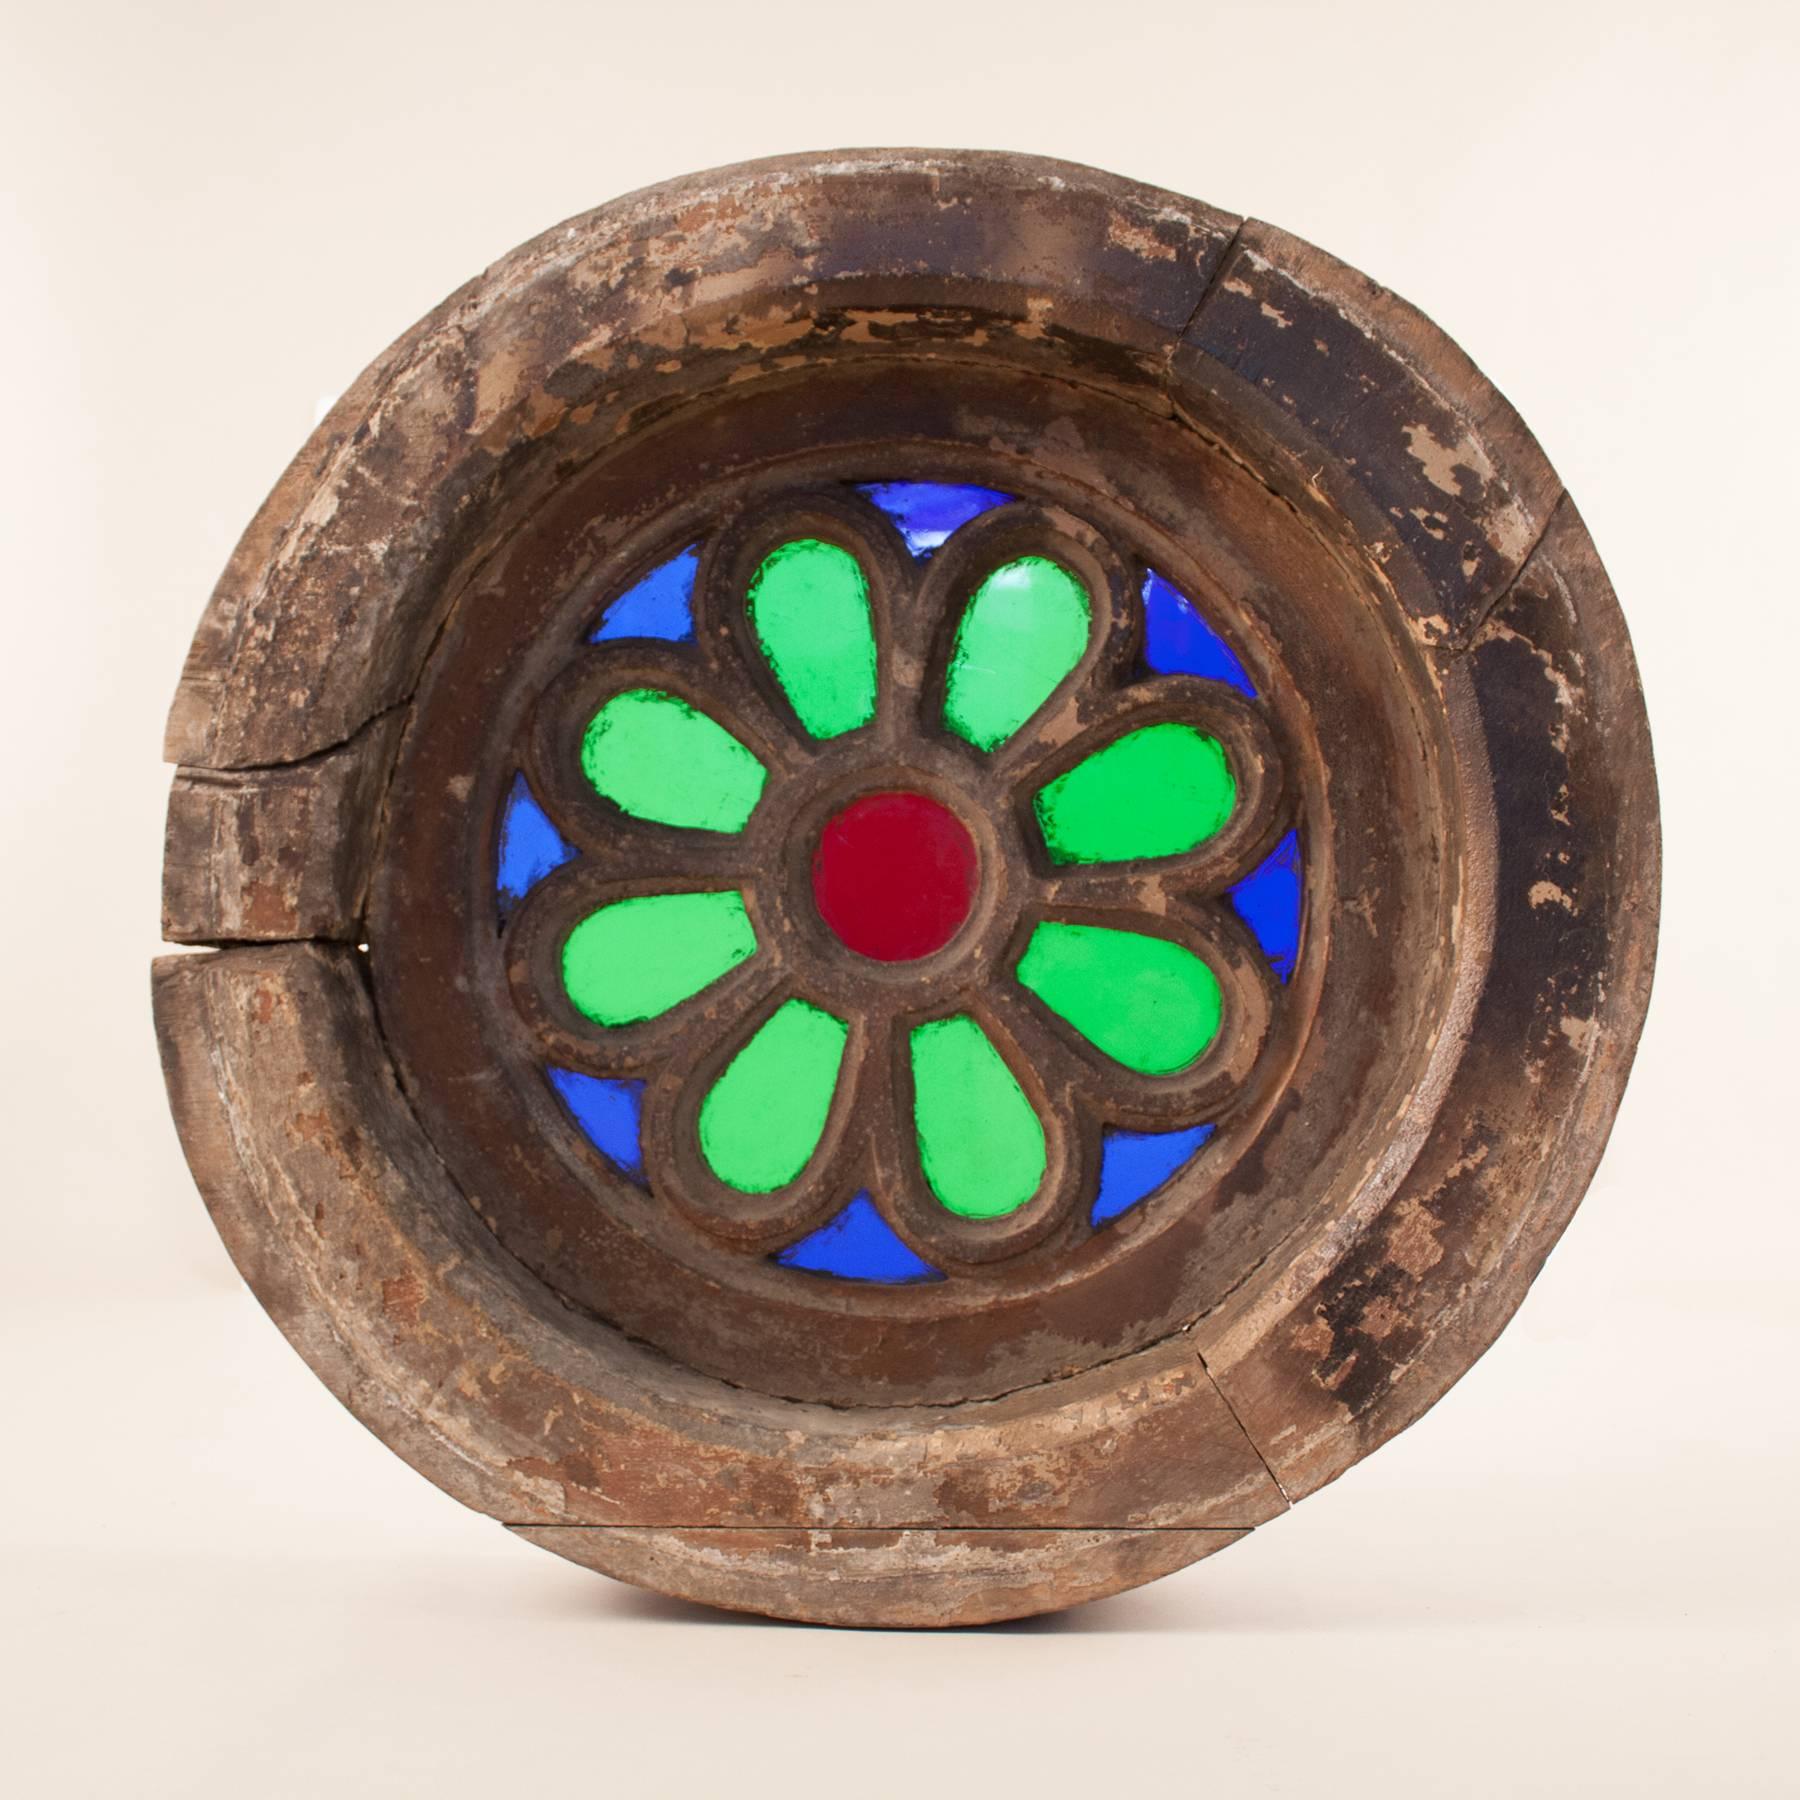 A rare and beautiful piece of colonial history, this circular window is fabricated from vibrant blue, green and red translucent glass set in a thick, three-piece teak wood frame. Likely salvaged from a Goa heritage home, this circa 1900 window is in